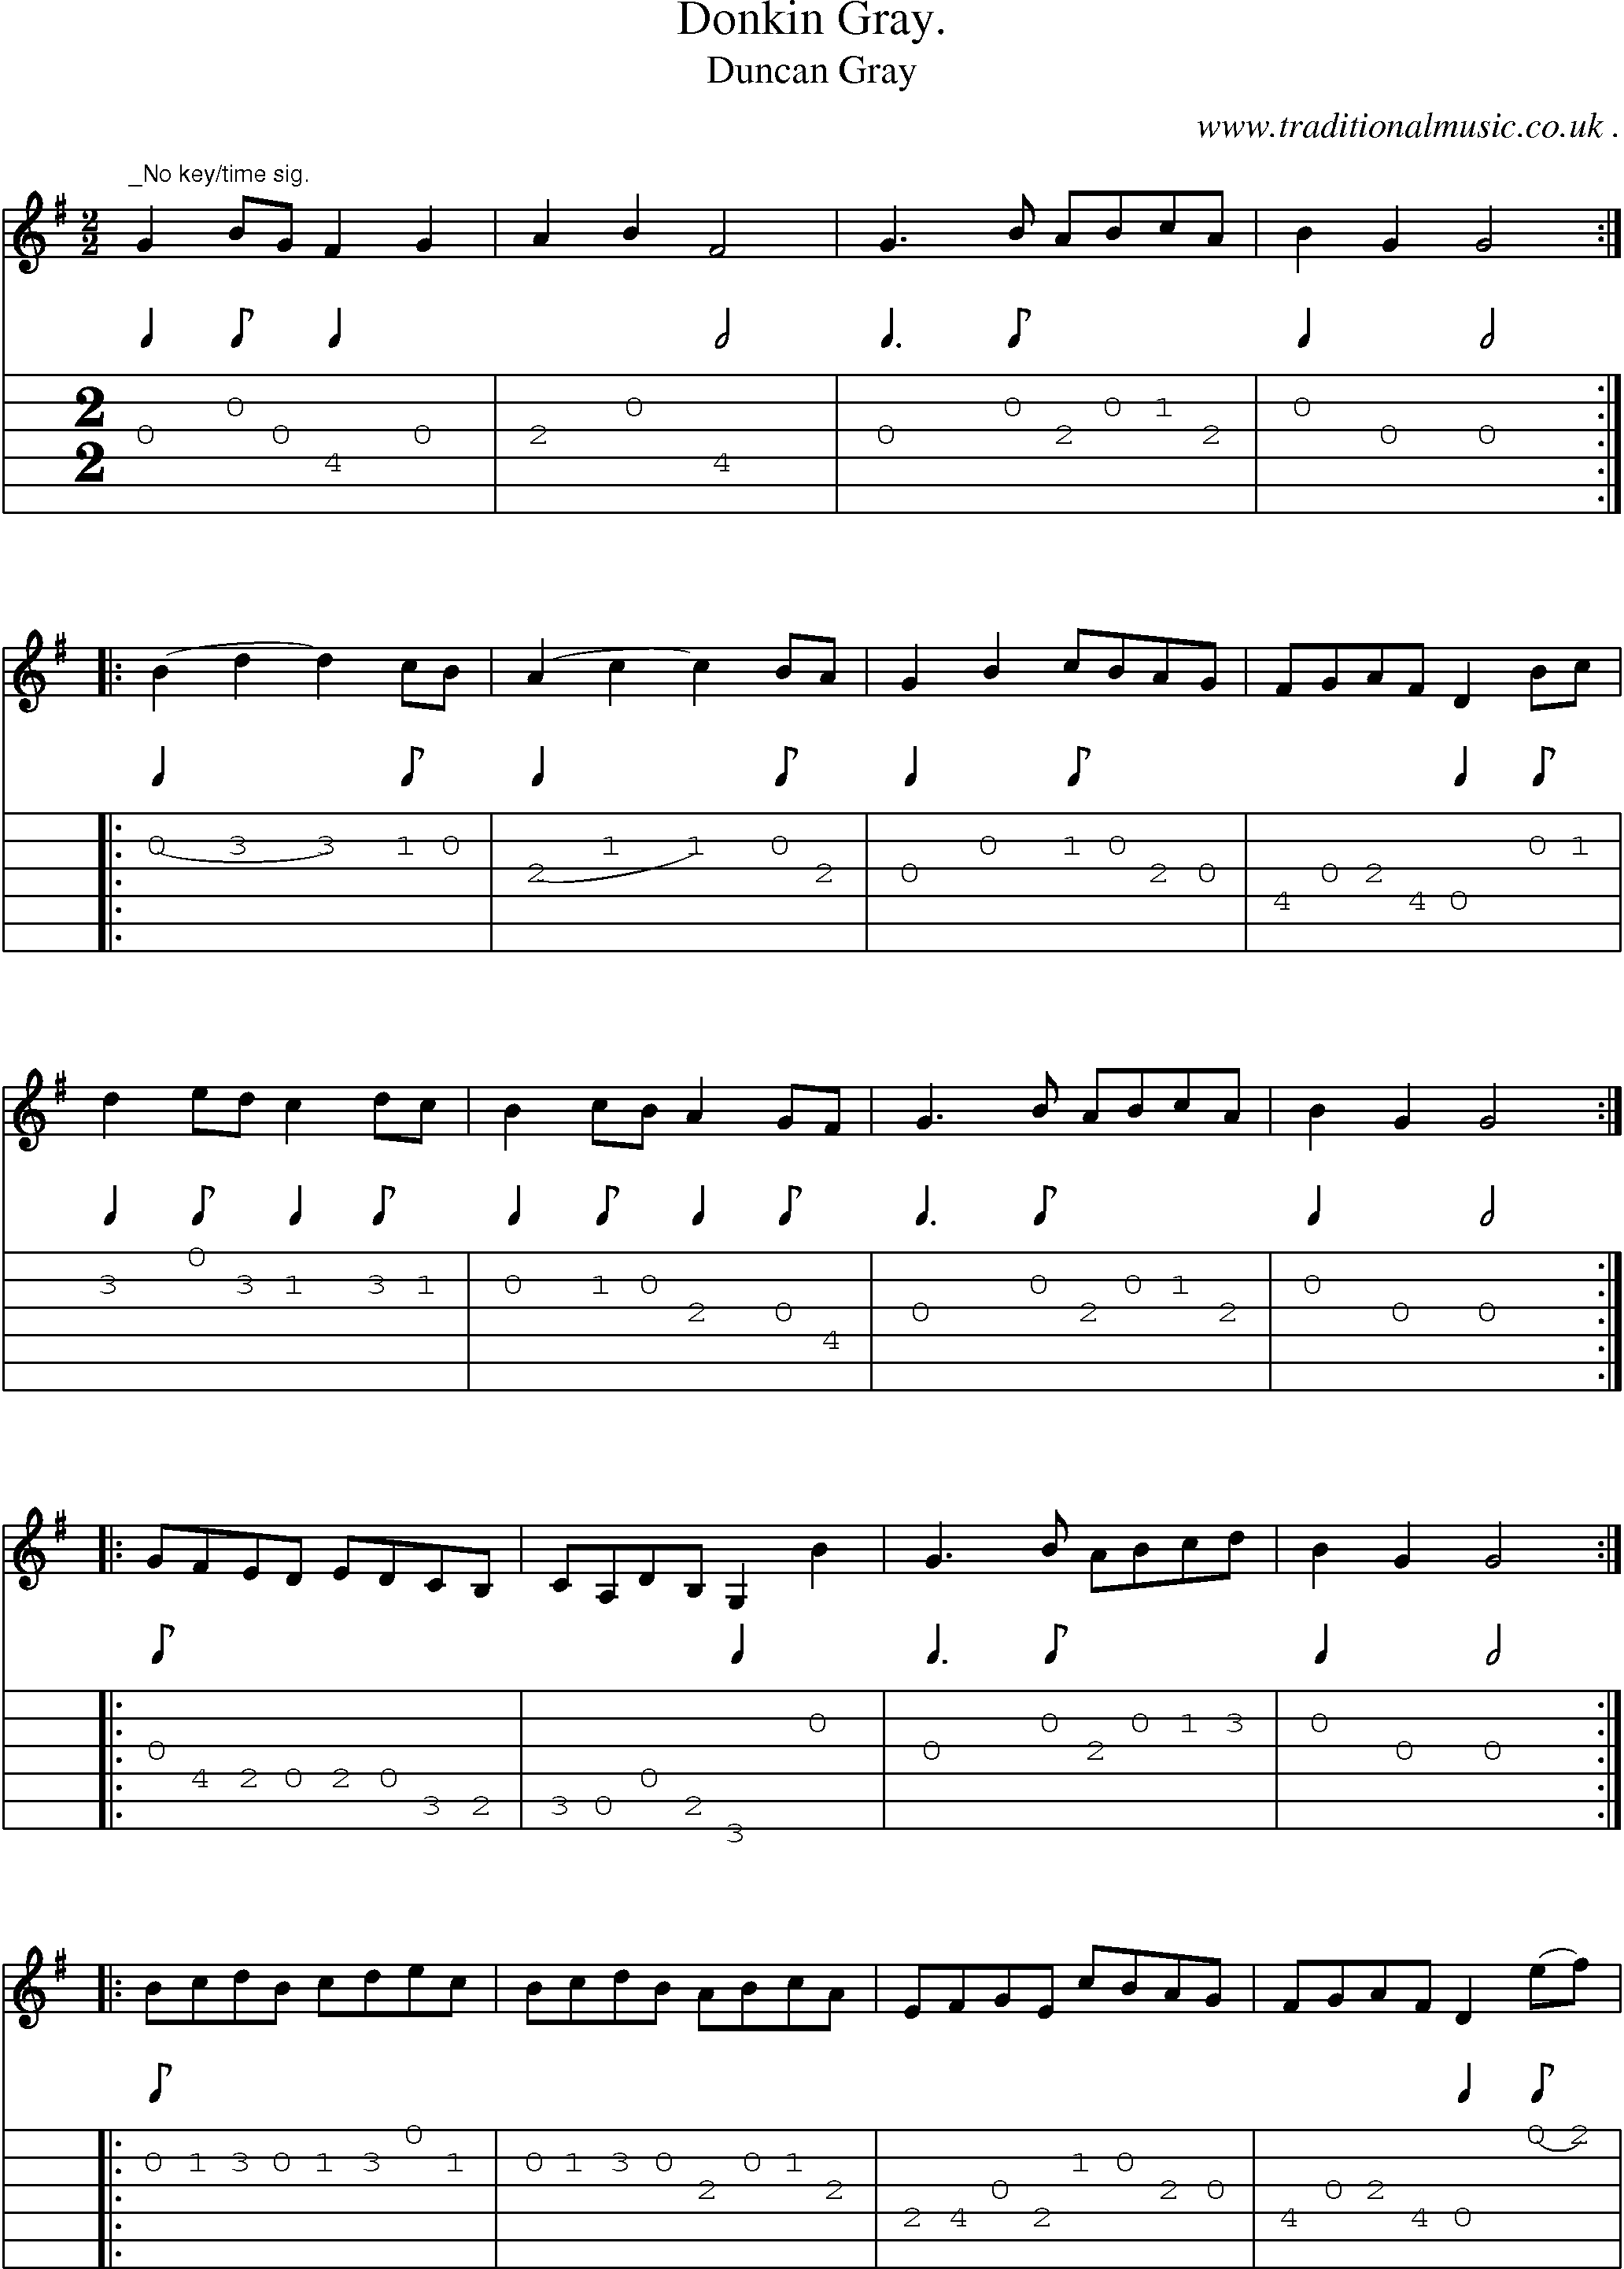 Sheet-Music and Guitar Tabs for Donkin Gray